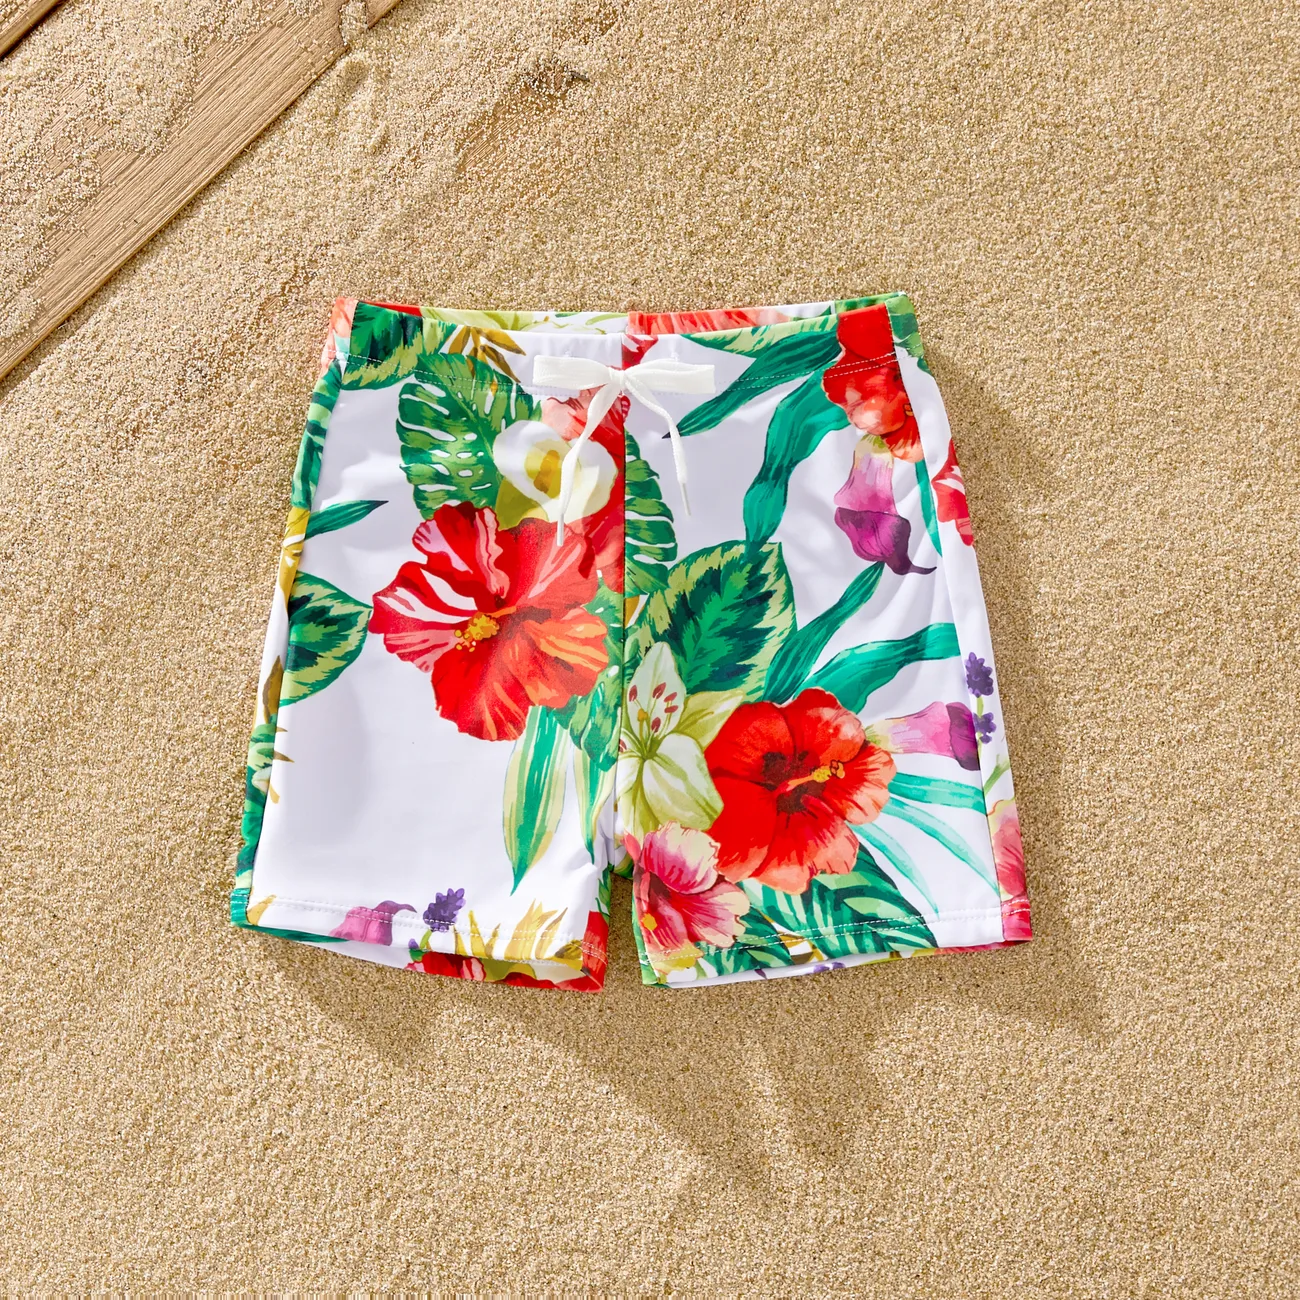 Family Matching Floral Drawstring Swim Trunks or Halter Tie Cross Front Swimsuit LightYellow big image 1